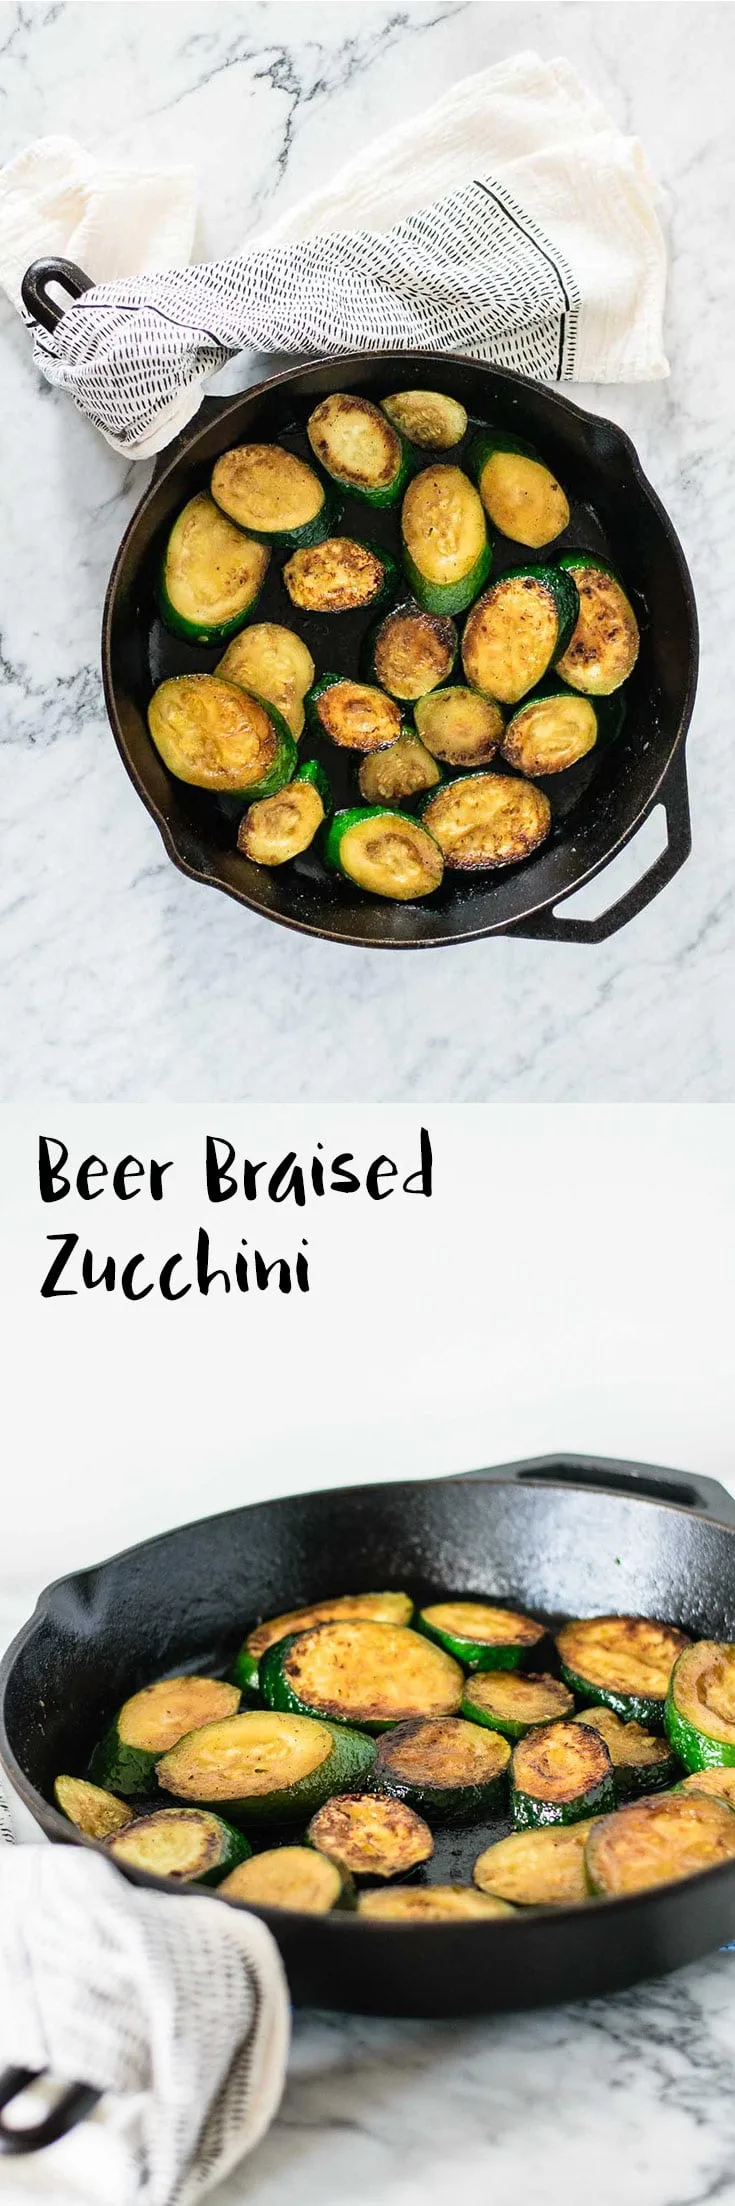 Beer braised zucchini is quick to make and delicious, only has 4 ingredients, and is the perfect accompaniment for so many summertime meals! | thecuriouschickpea.com